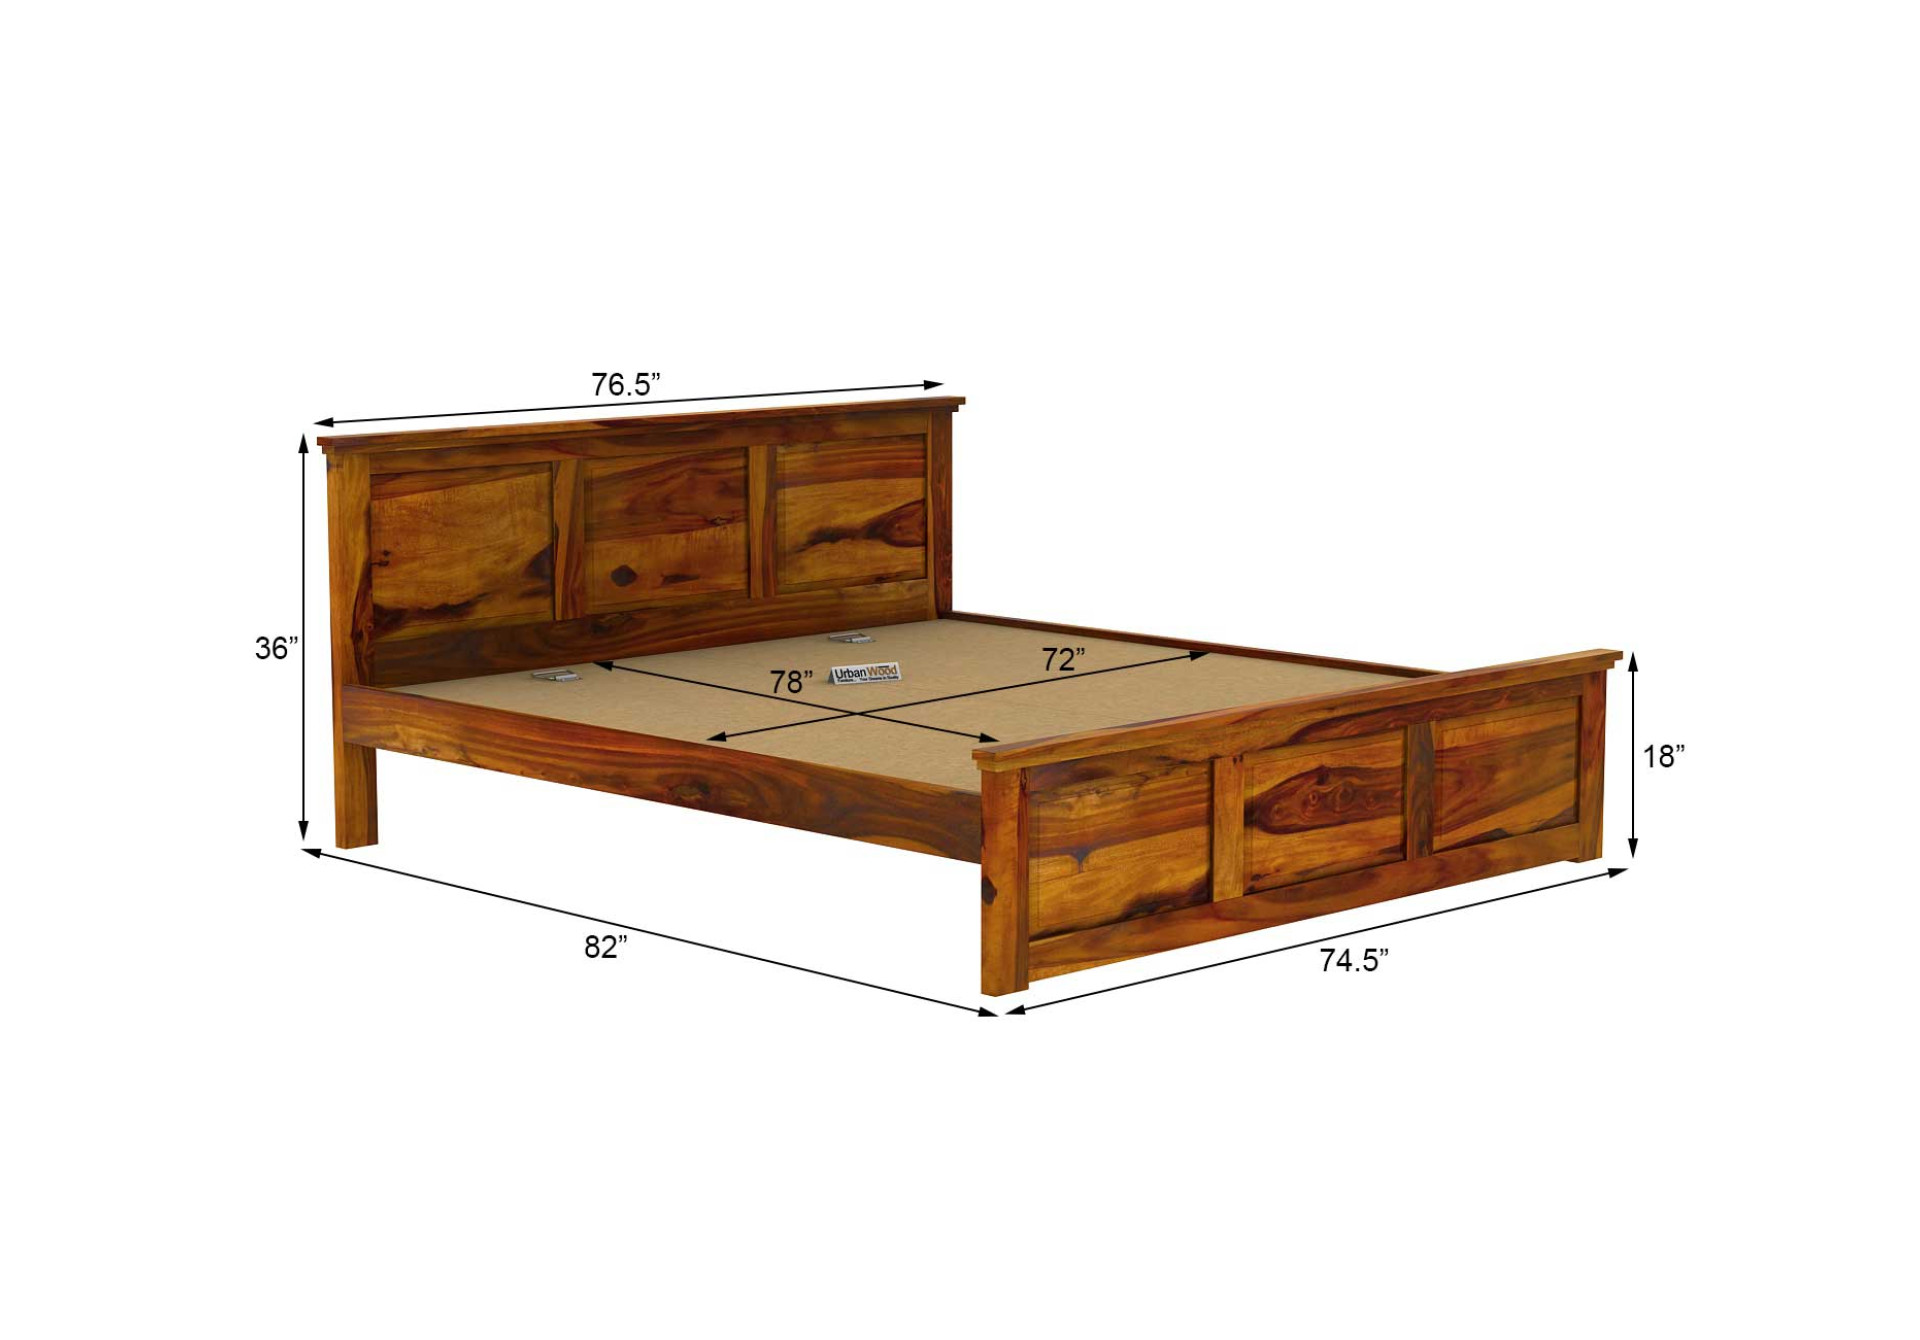 Babson Without Storage Bed (King Size, Honey Finish)